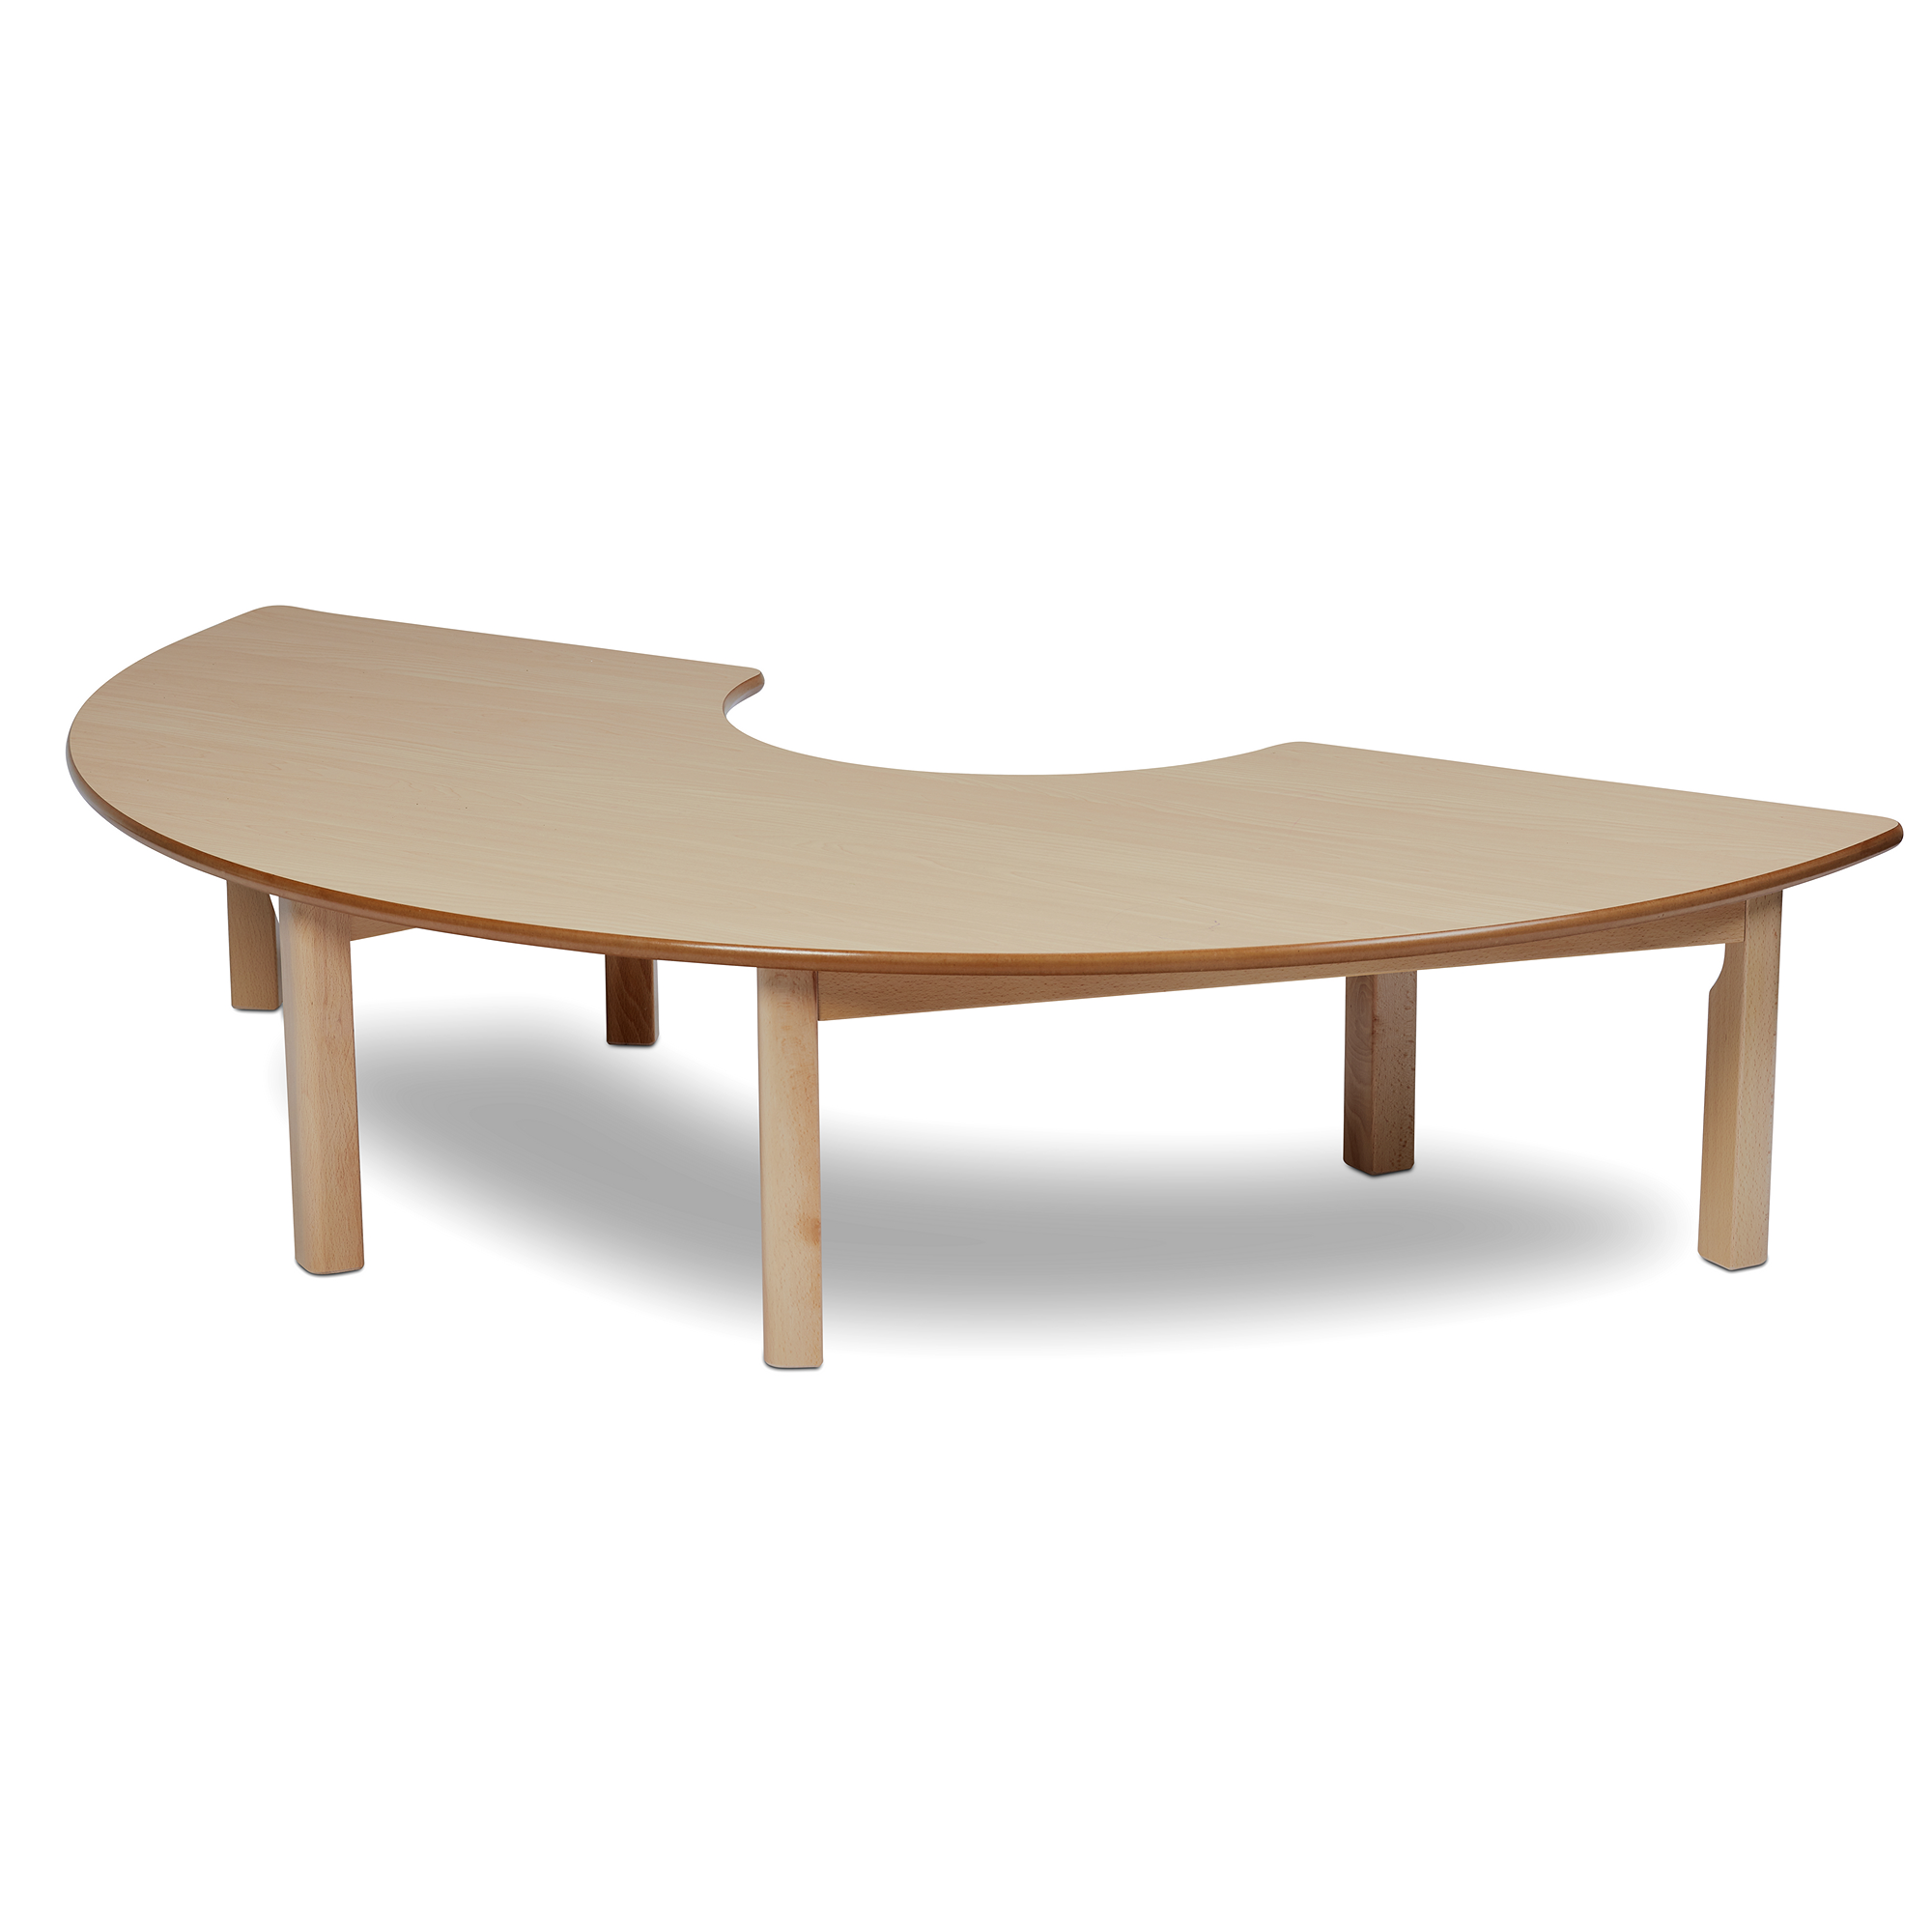 Semi Circle Table - 400mm Height